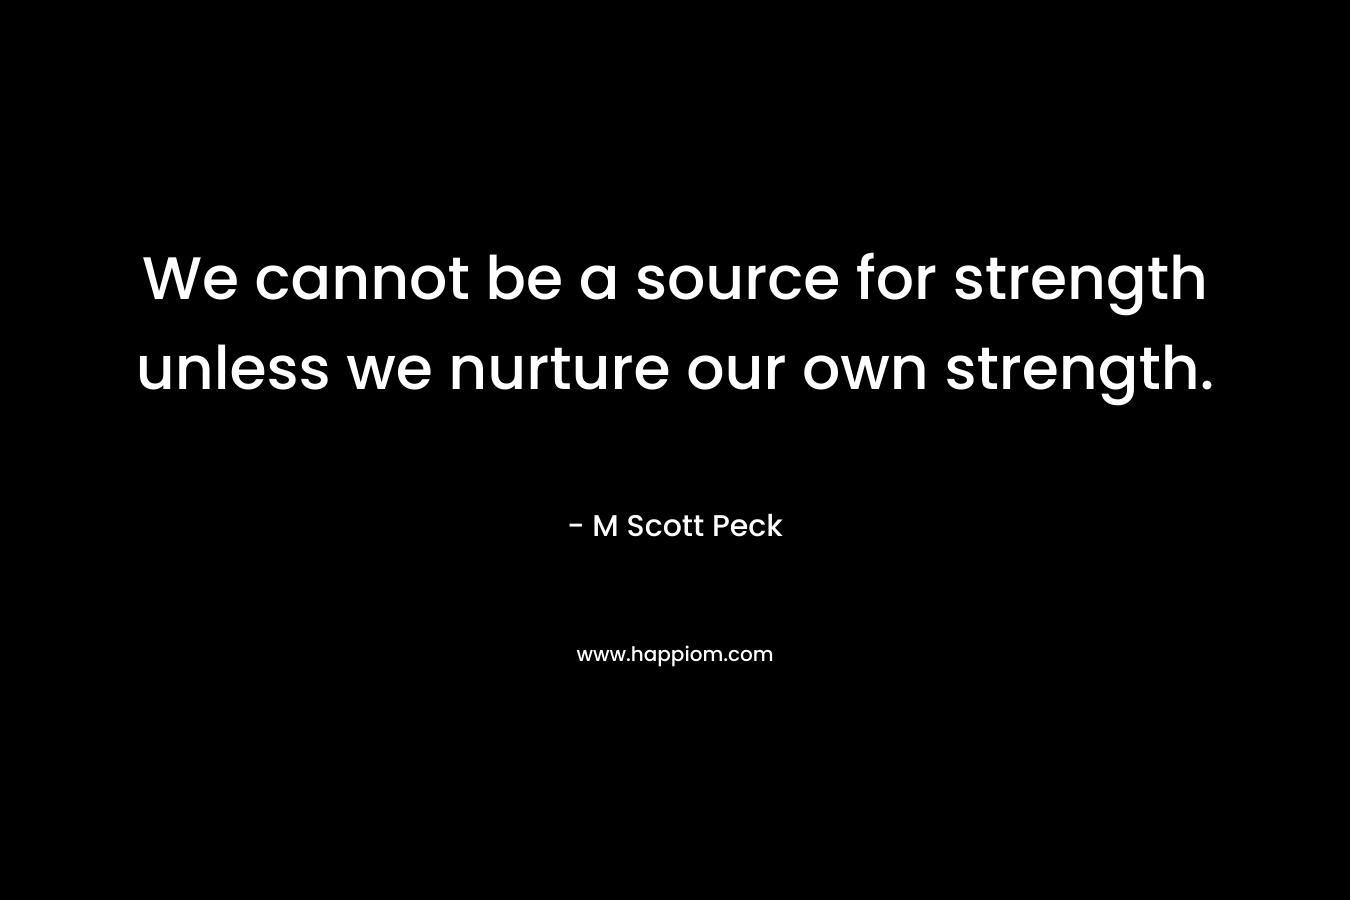 We cannot be a source for strength unless we nurture our own strength.